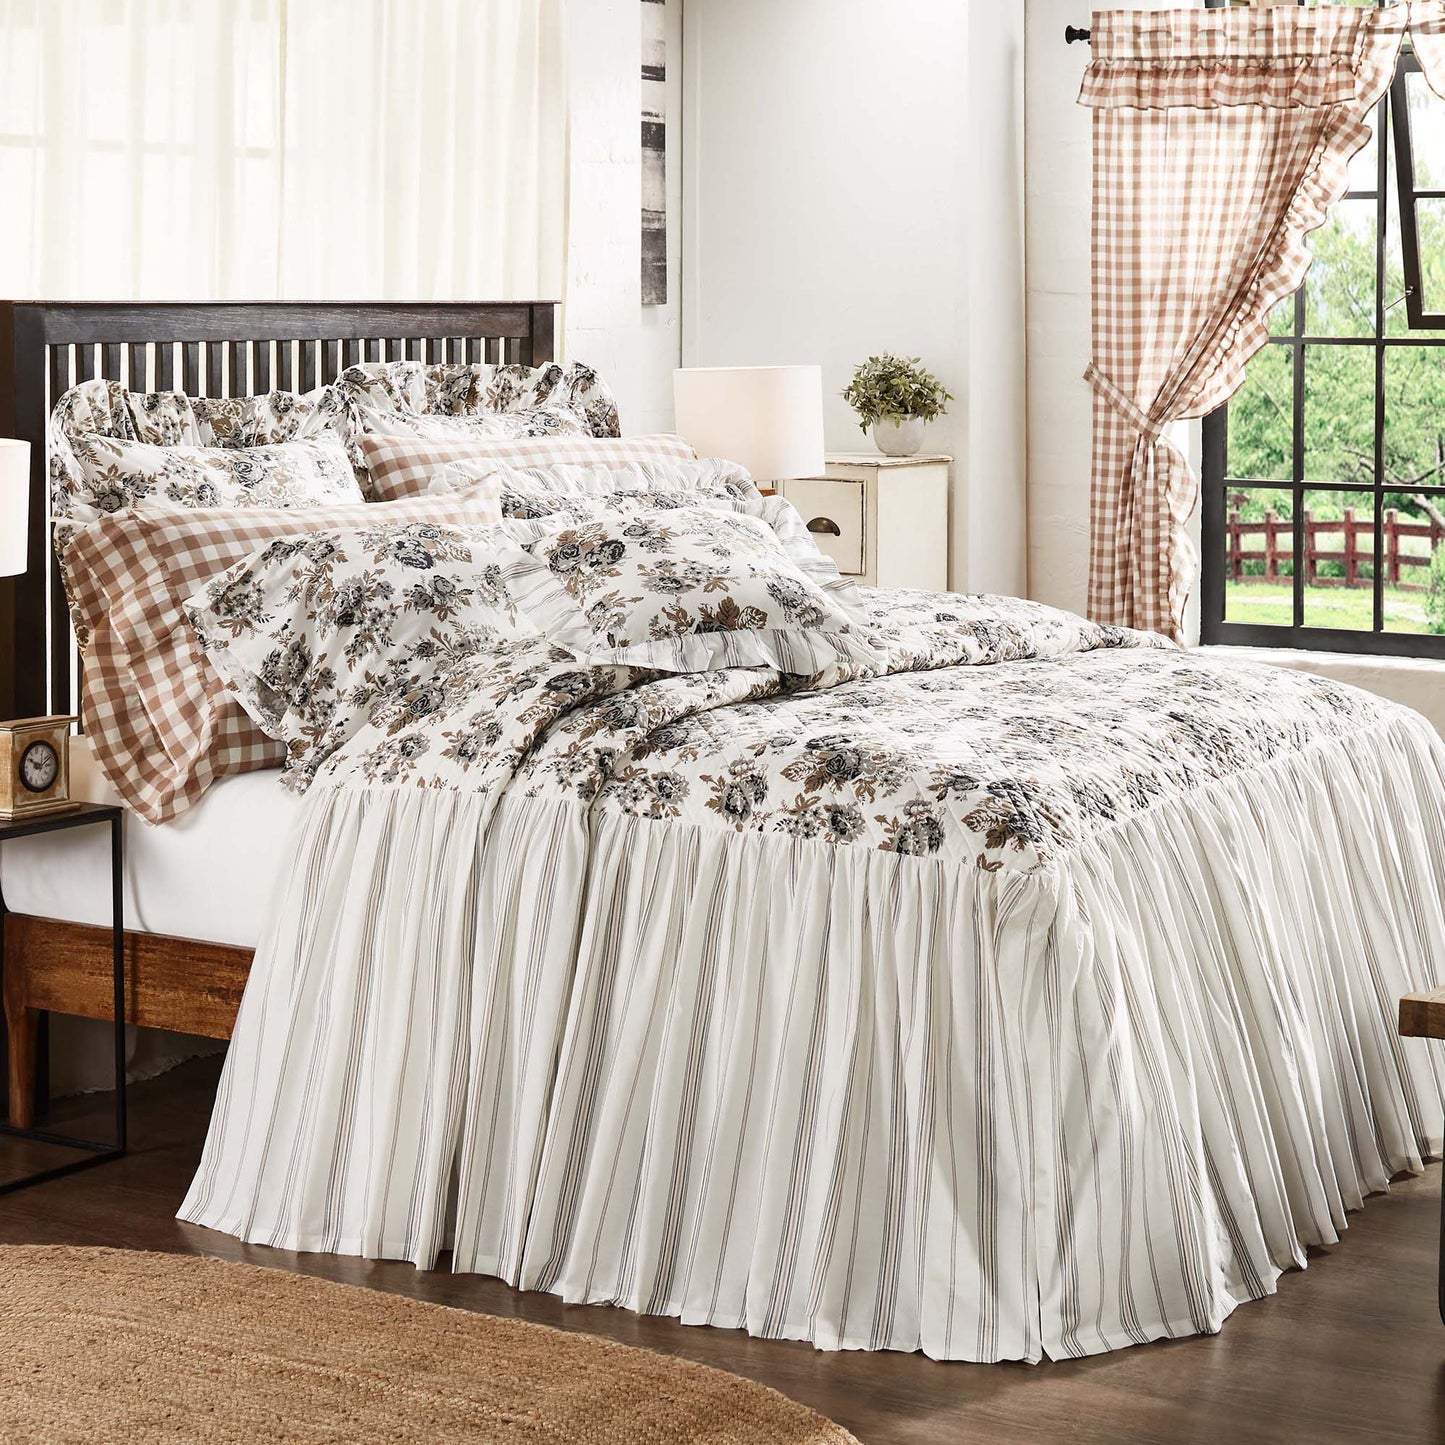 70012-Annie-Portabella-Floral-Ruffled-Queen-Coverlet-80x60-27-image-3